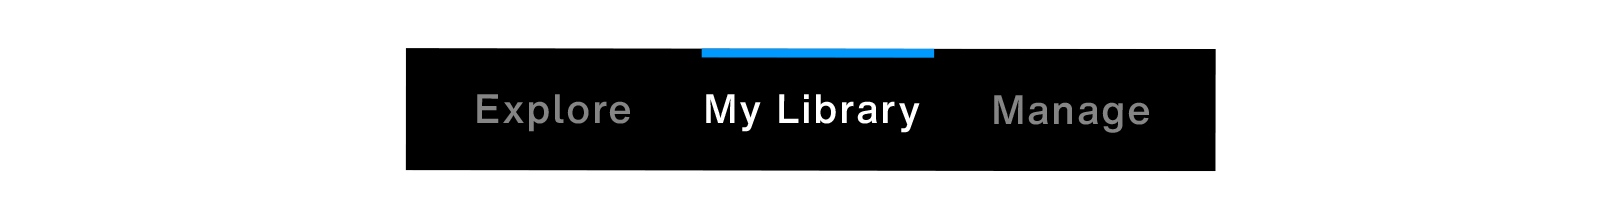 My library_02